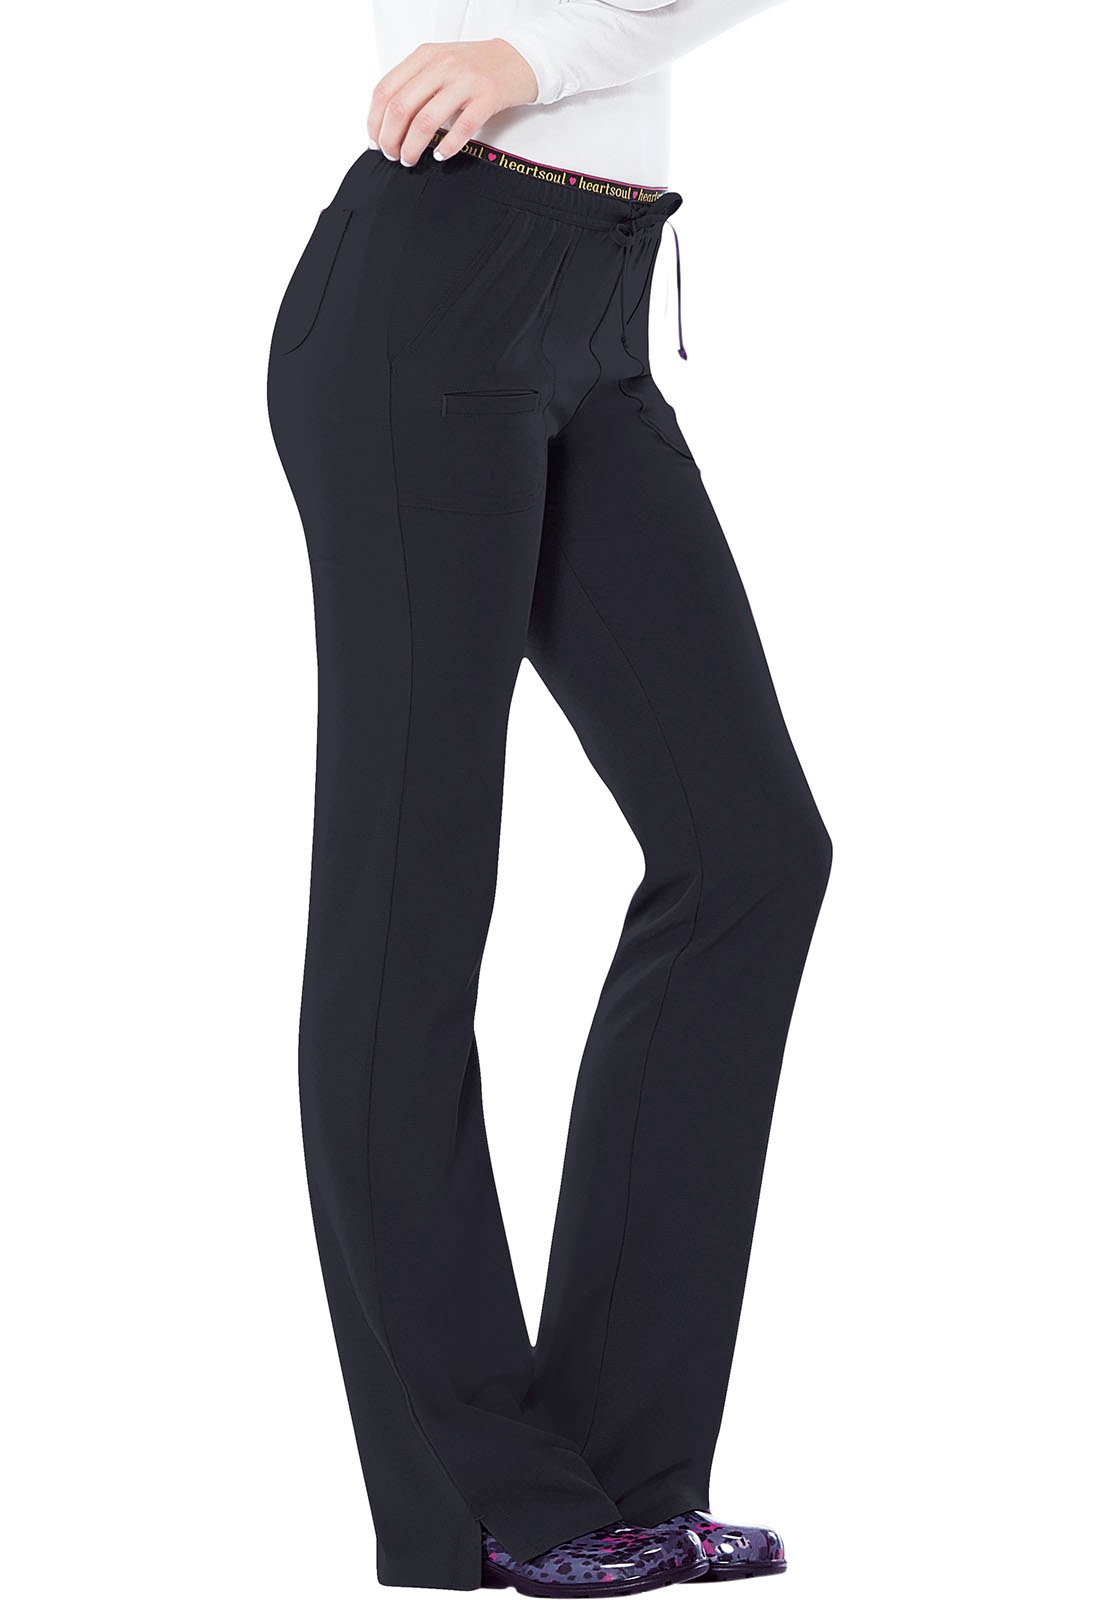 JOY LAB Women's Small Comfy Stretch Space Dye High-Rise Active